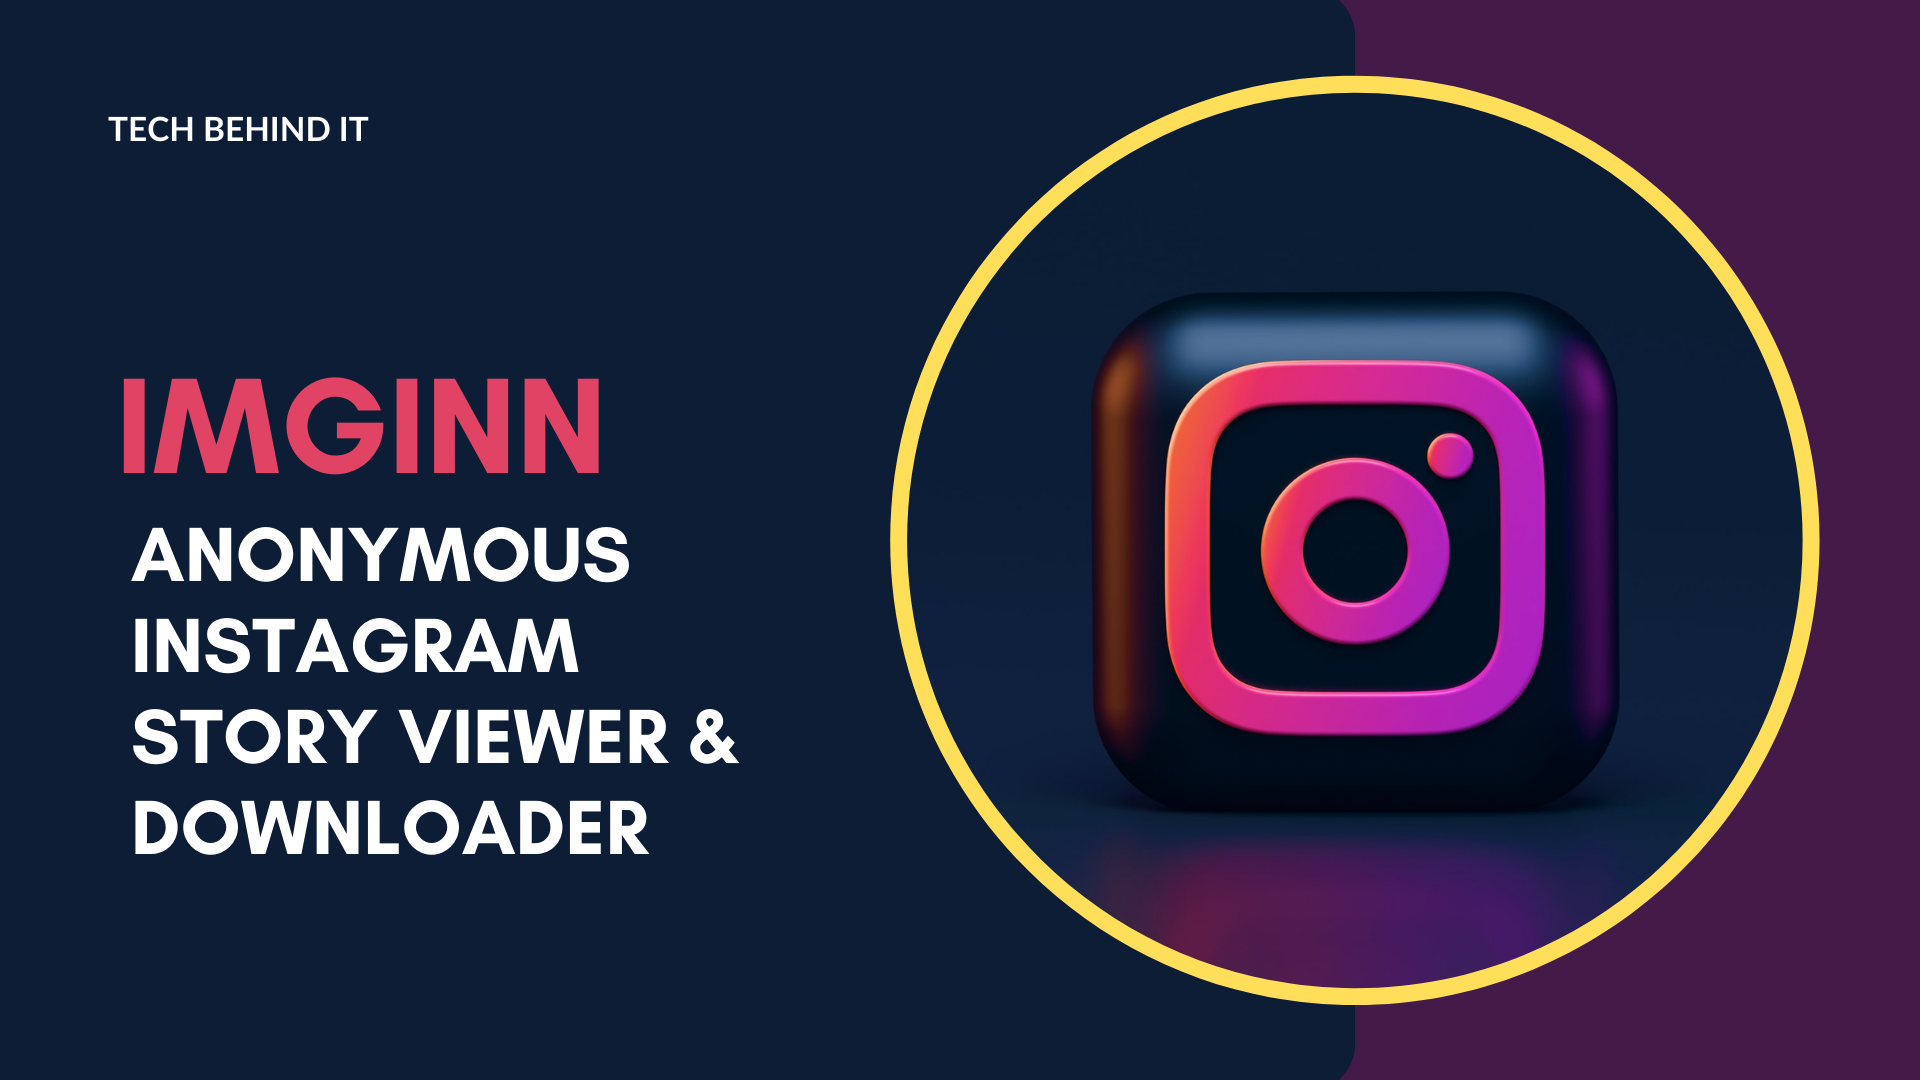 Anonymous Instagram Story Viewer & Downloader: Imginn